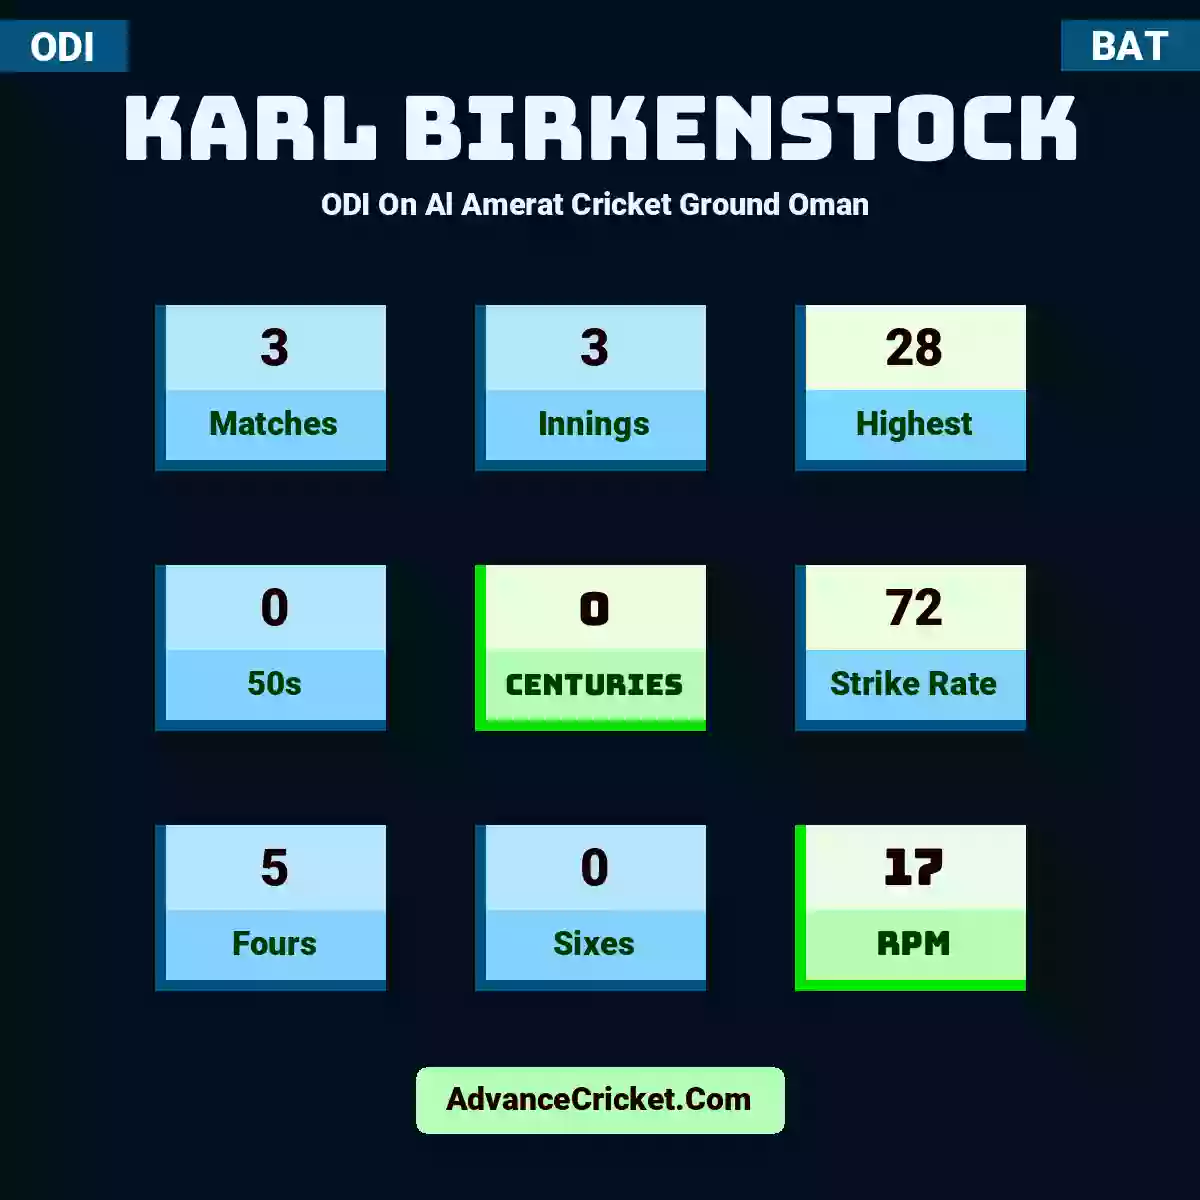 Karl Birkenstock ODI  On Al Amerat Cricket Ground Oman , Karl Birkenstock played 3 matches, scored 28 runs as highest, 0 half-centuries, and 0 centuries, with a strike rate of 72. K.Birkenstock hit 5 fours and 0 sixes, with an RPM of 17.